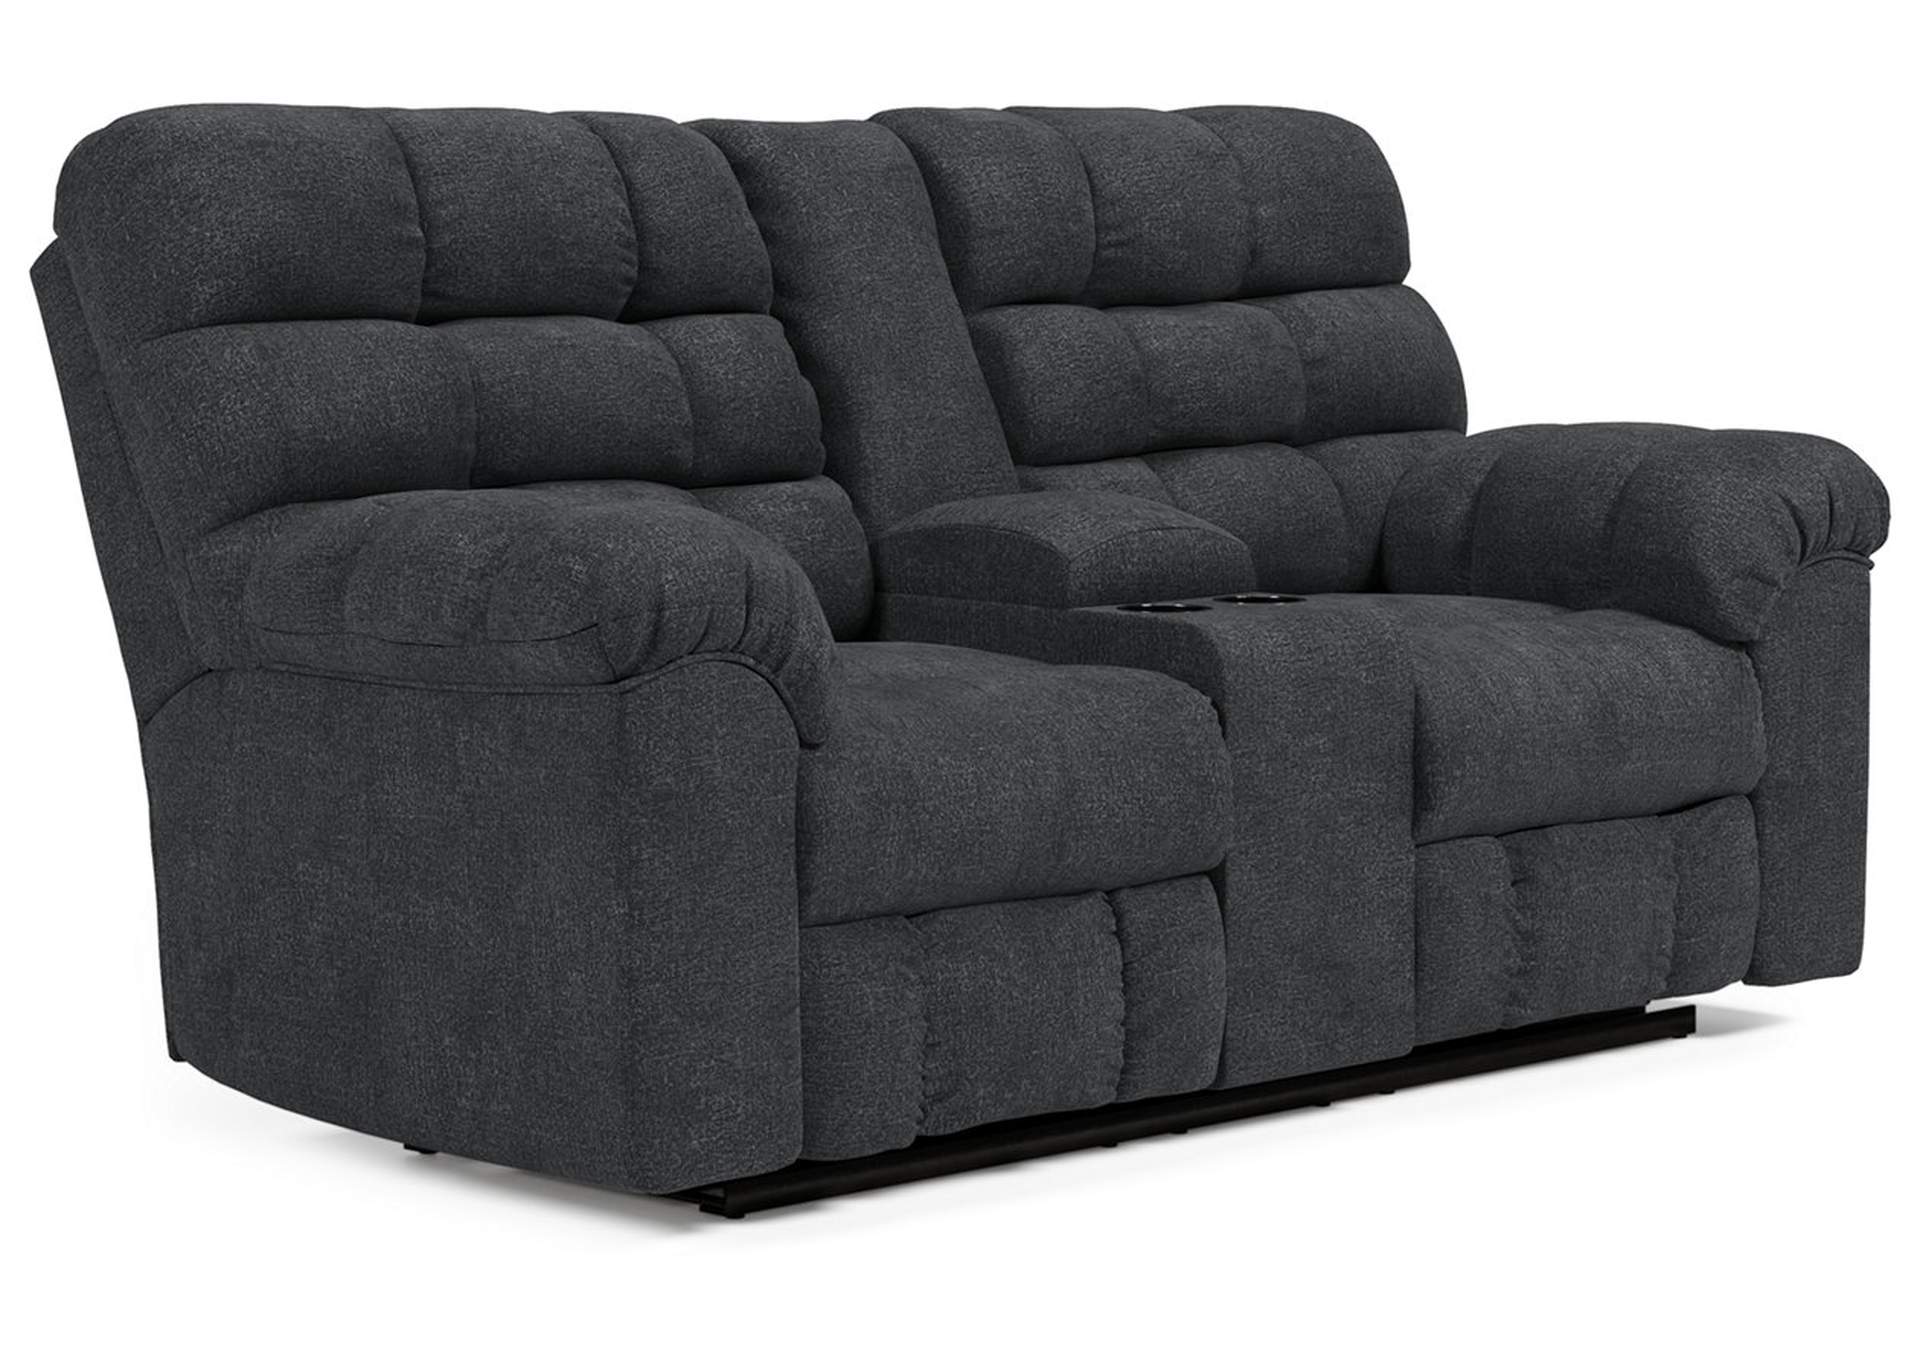 Wilhurst Sofa and Loveseat,Signature Design By Ashley